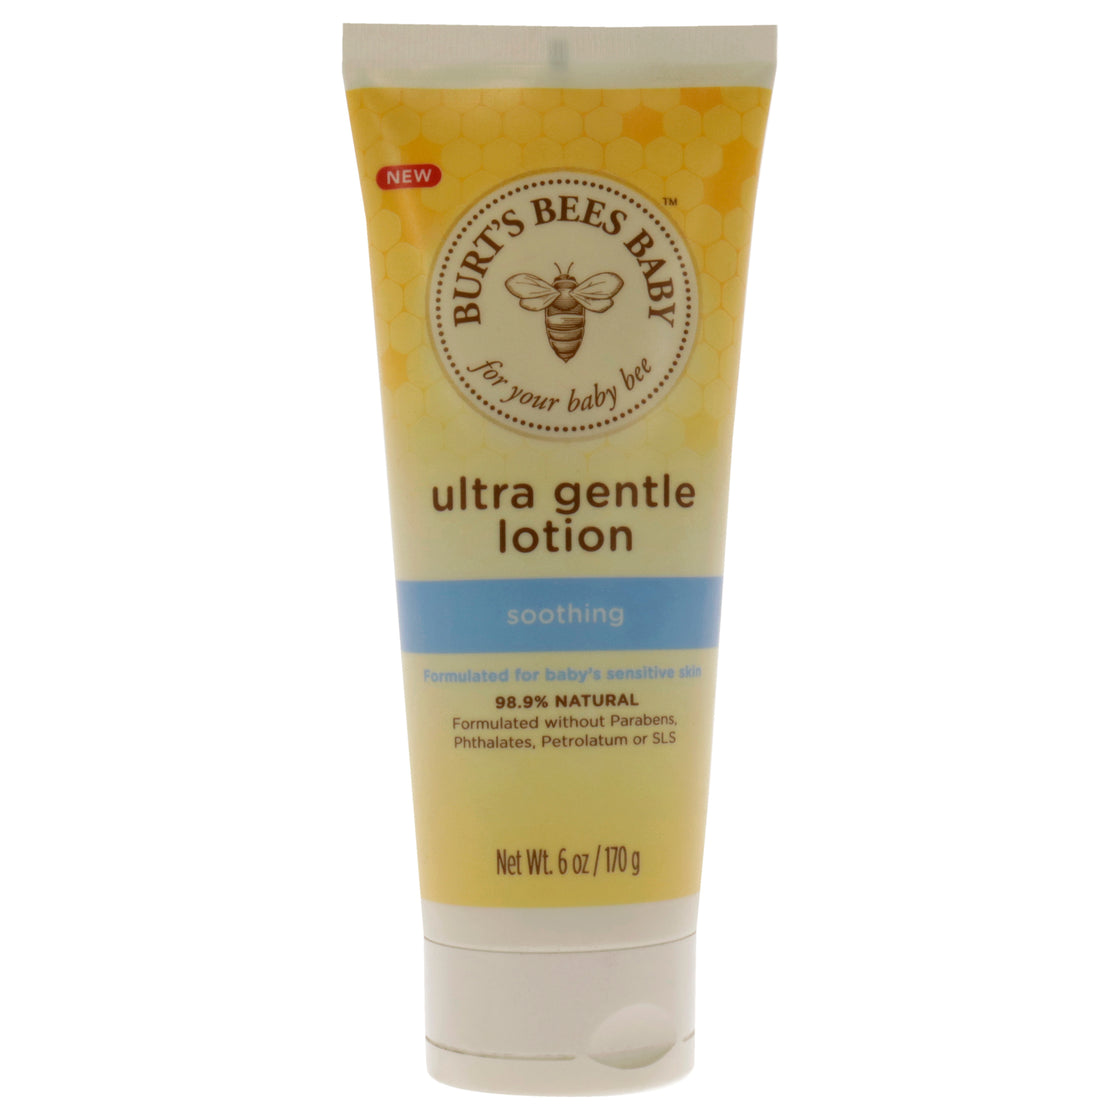 Baby Ultra Gentle Lotion by Burts Bees for Kids - 6 oz Body Lotion